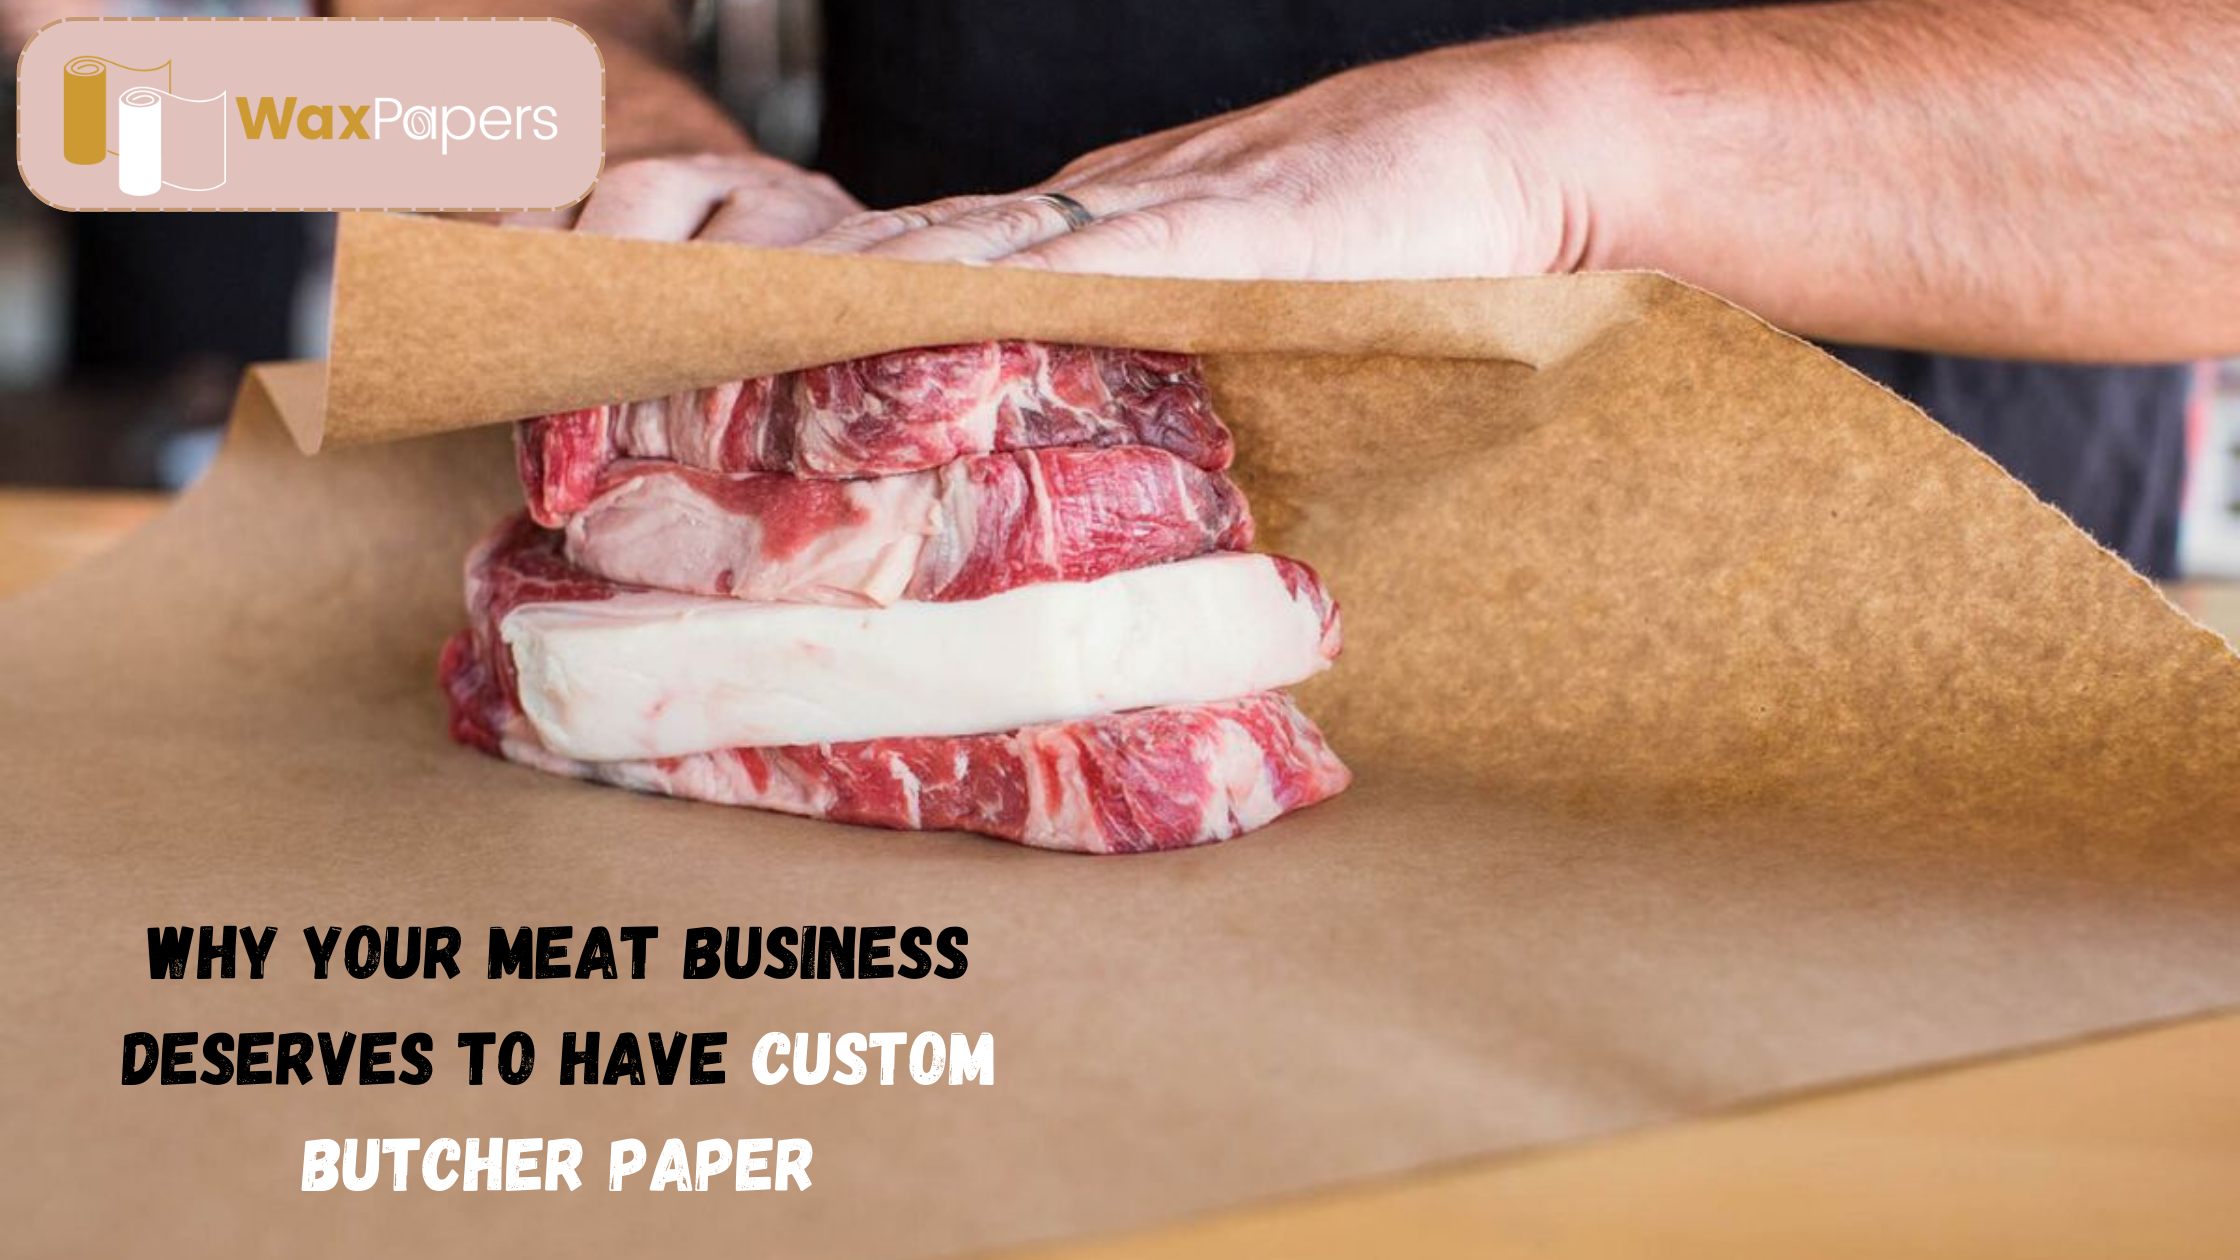 Why Your Meat Business Deserves To Have Custom Butcher Paper